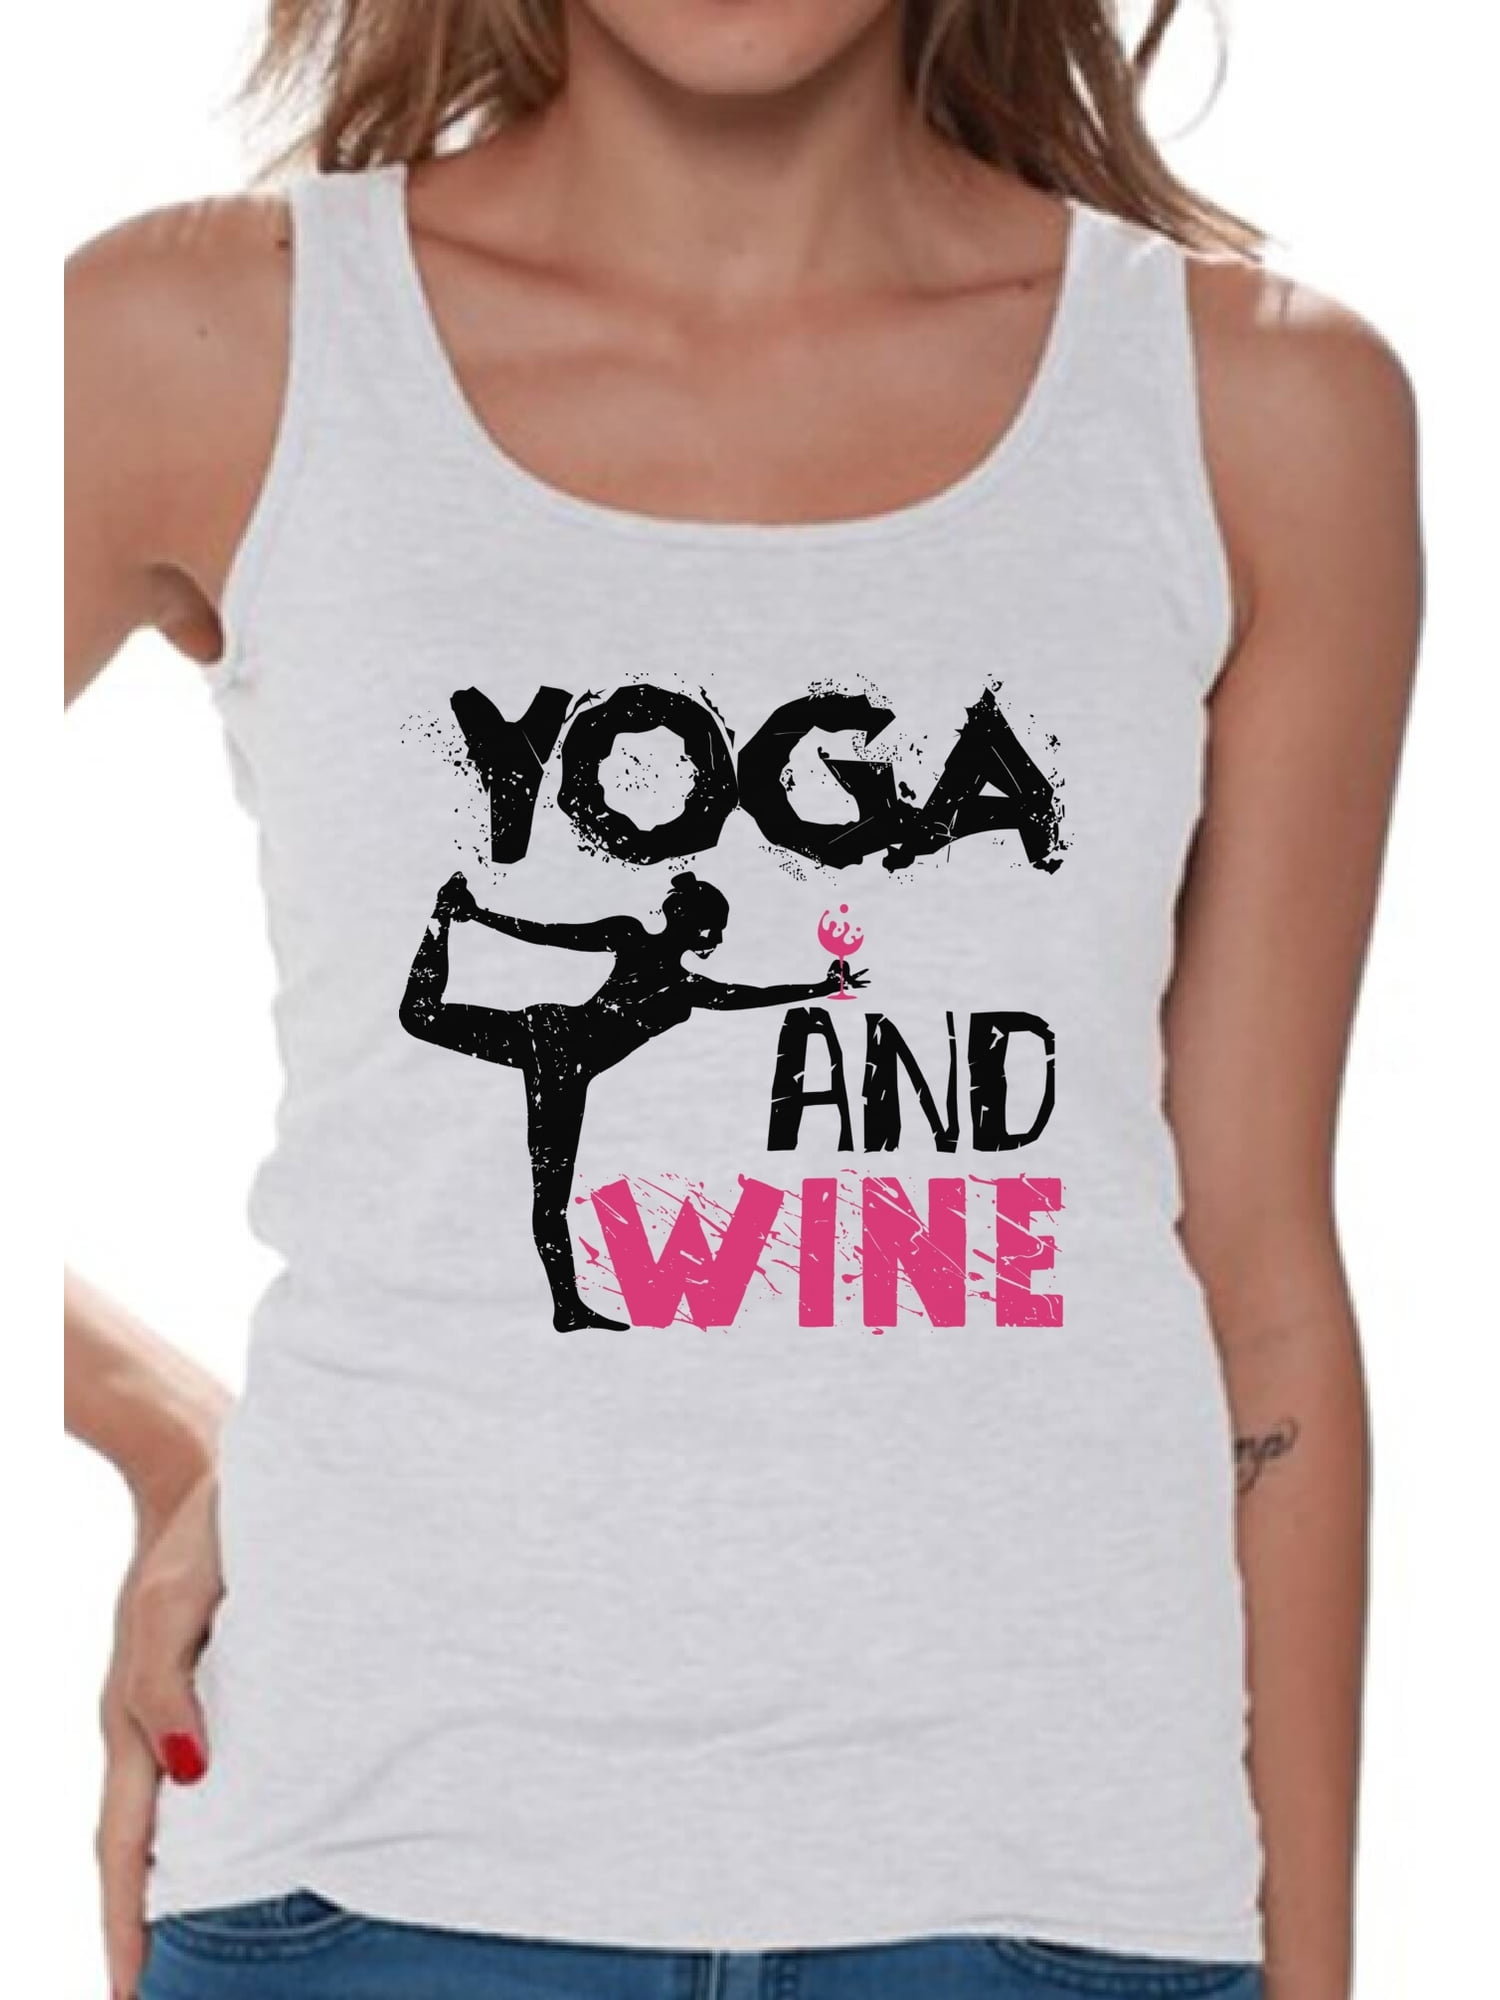 Funny Tank Top Muscle Tank Top Women/'s Muscle Tee Time to Wine Down Party Tank Wine Tank Top Yoga Tank Top